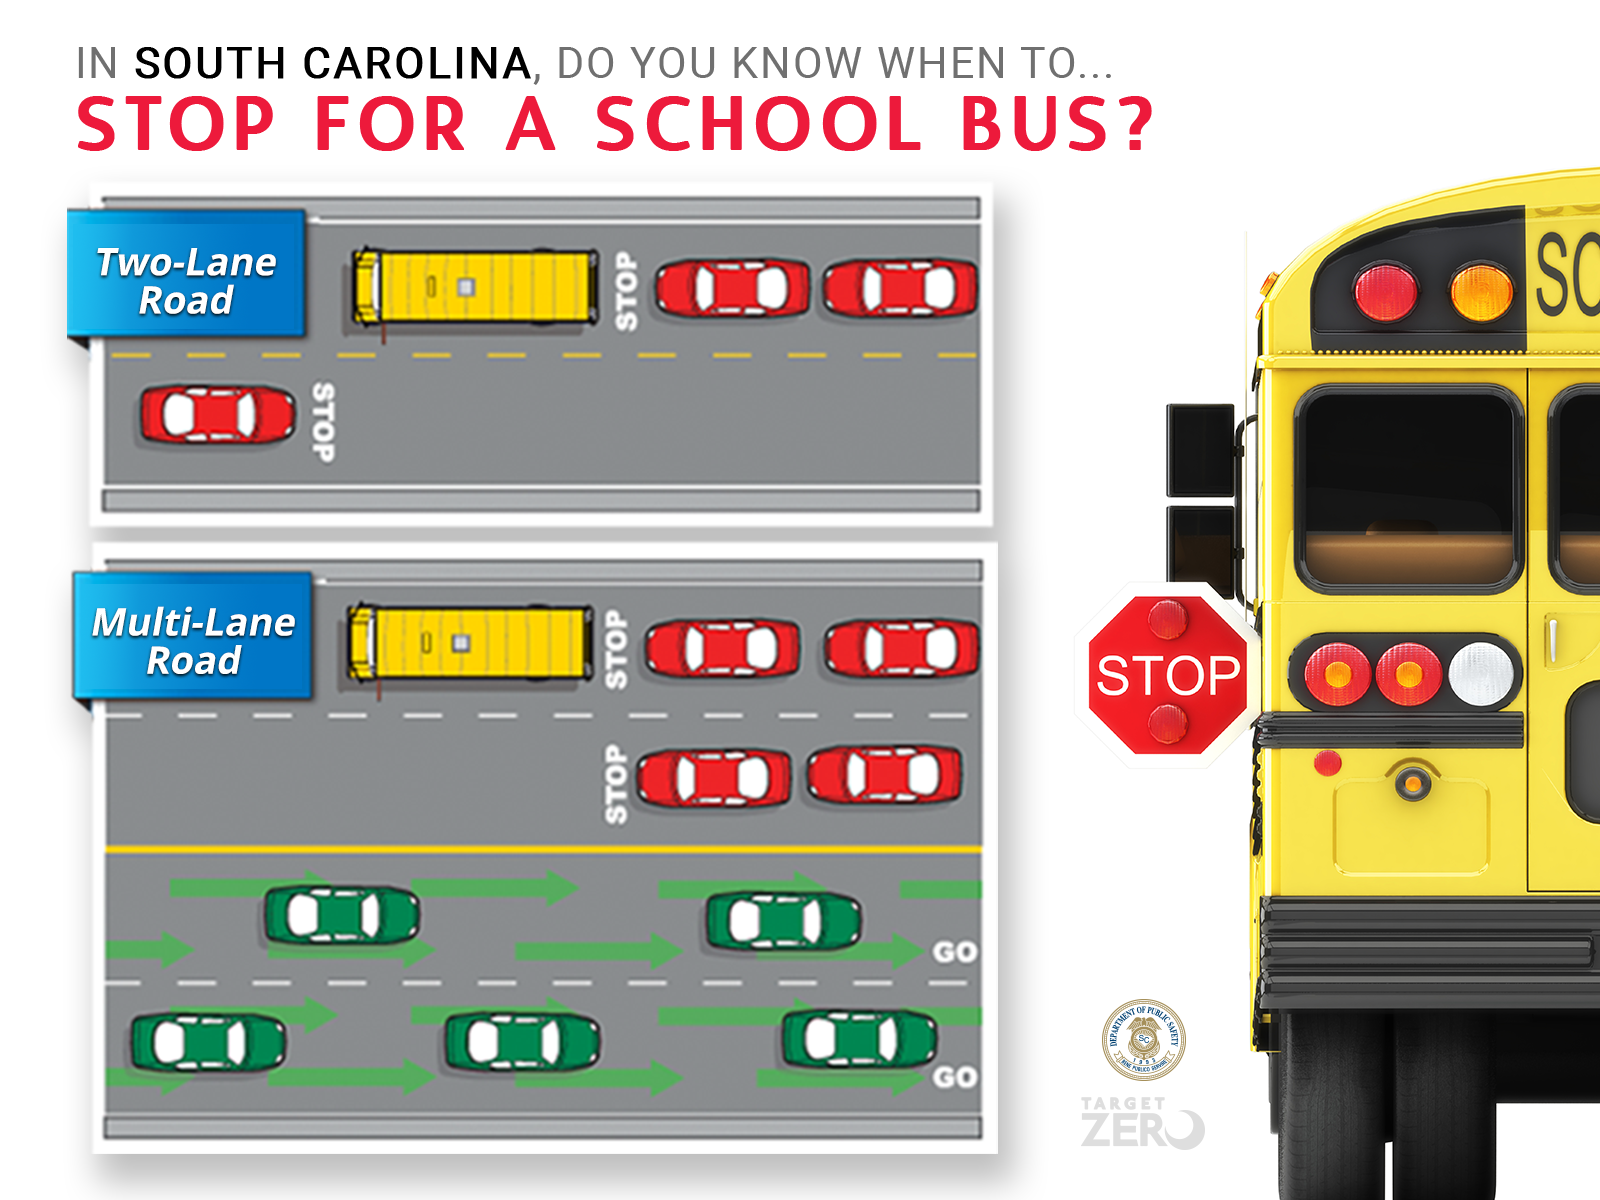 When to stop for a school bus?